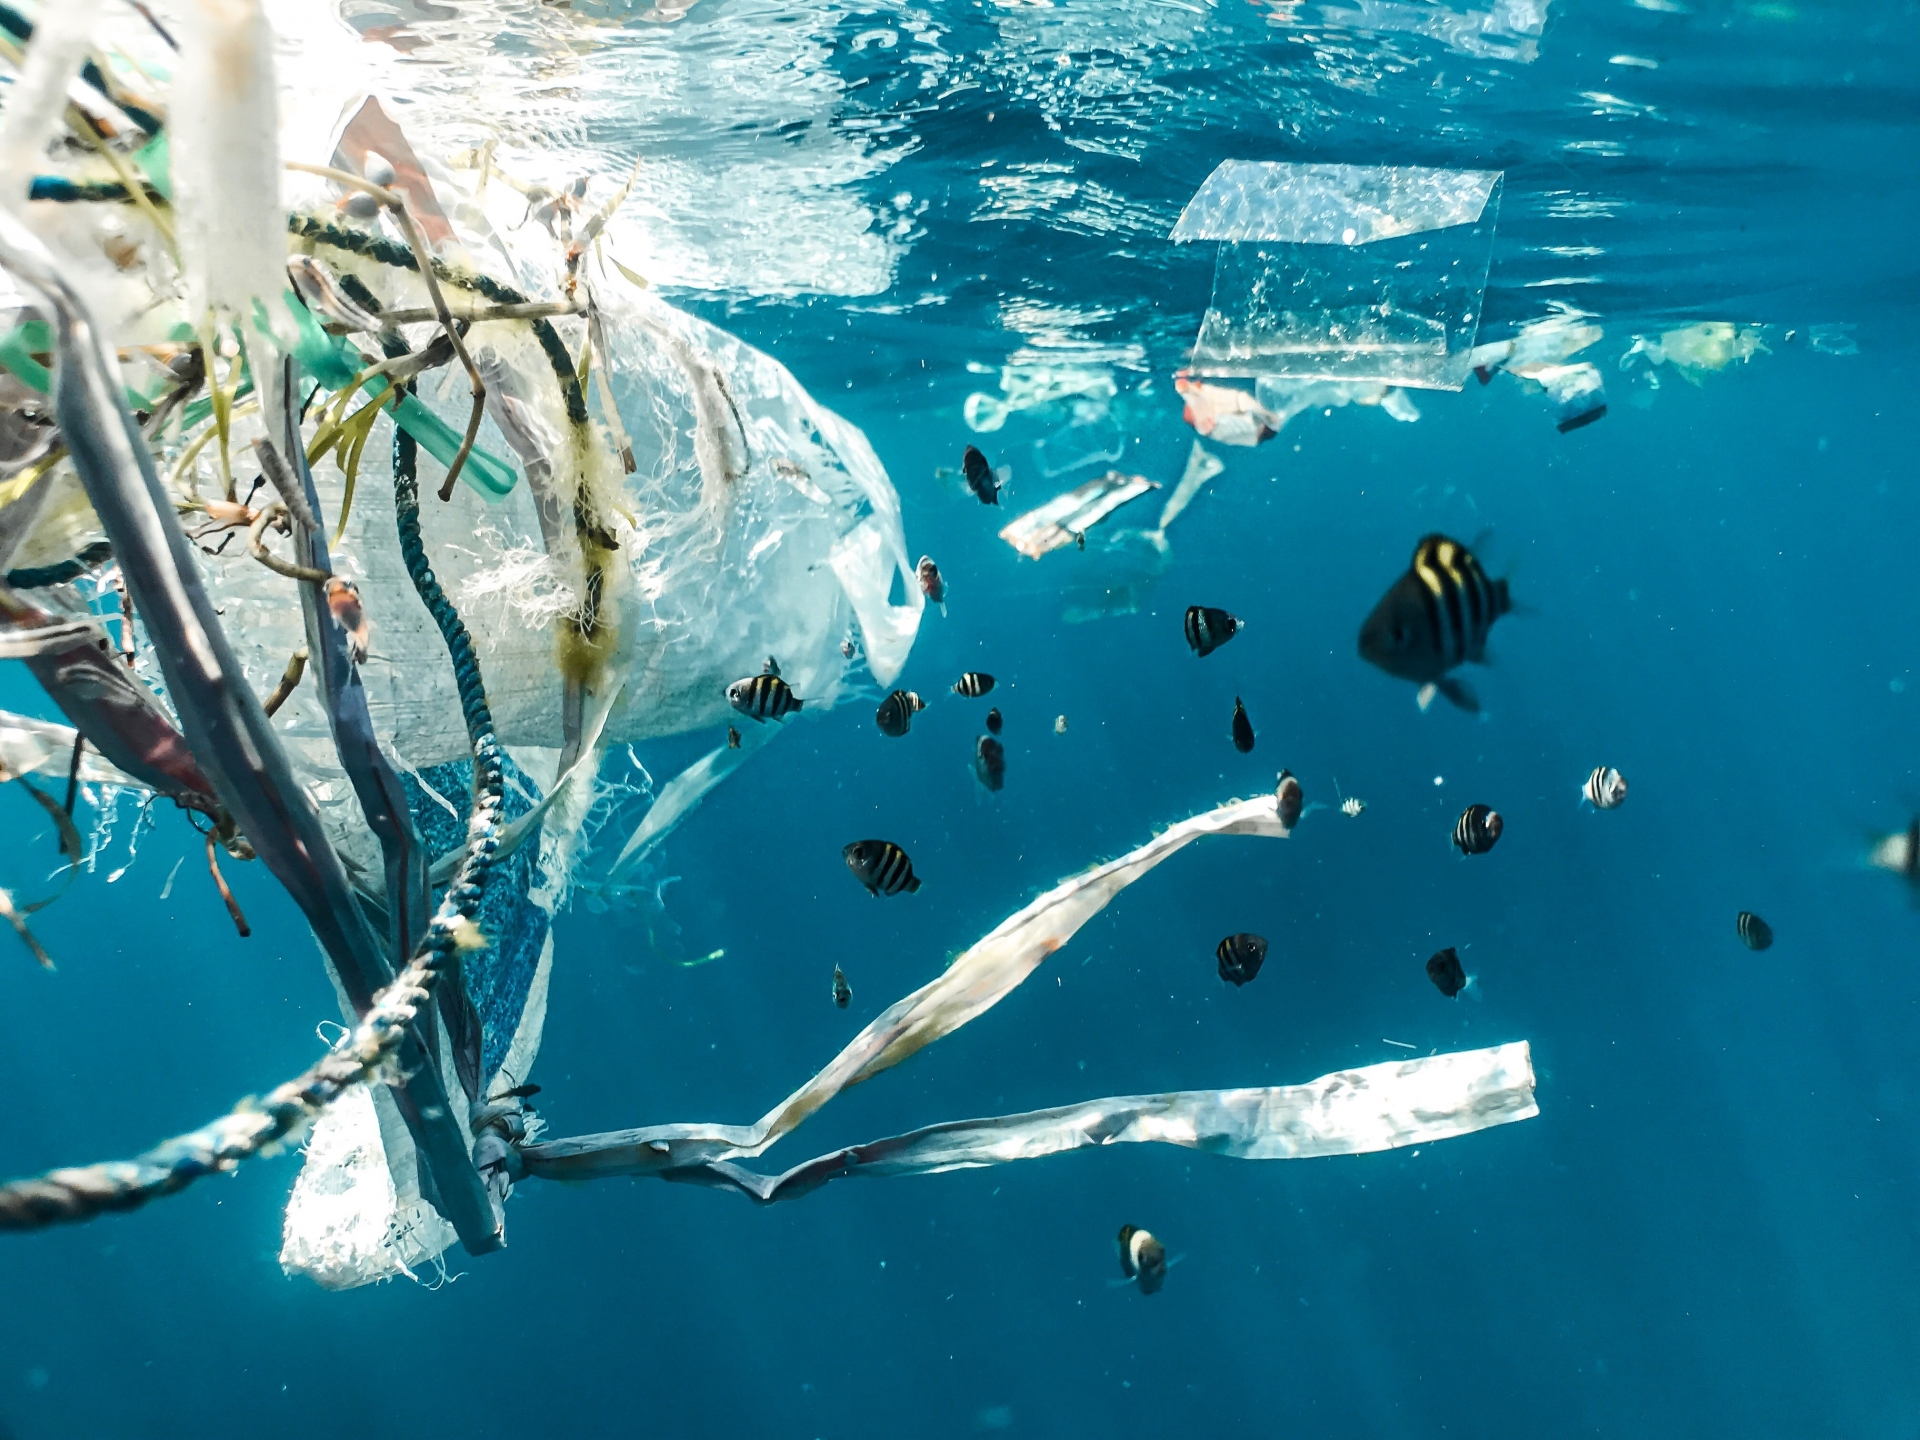 A global solution to plastic pollution?